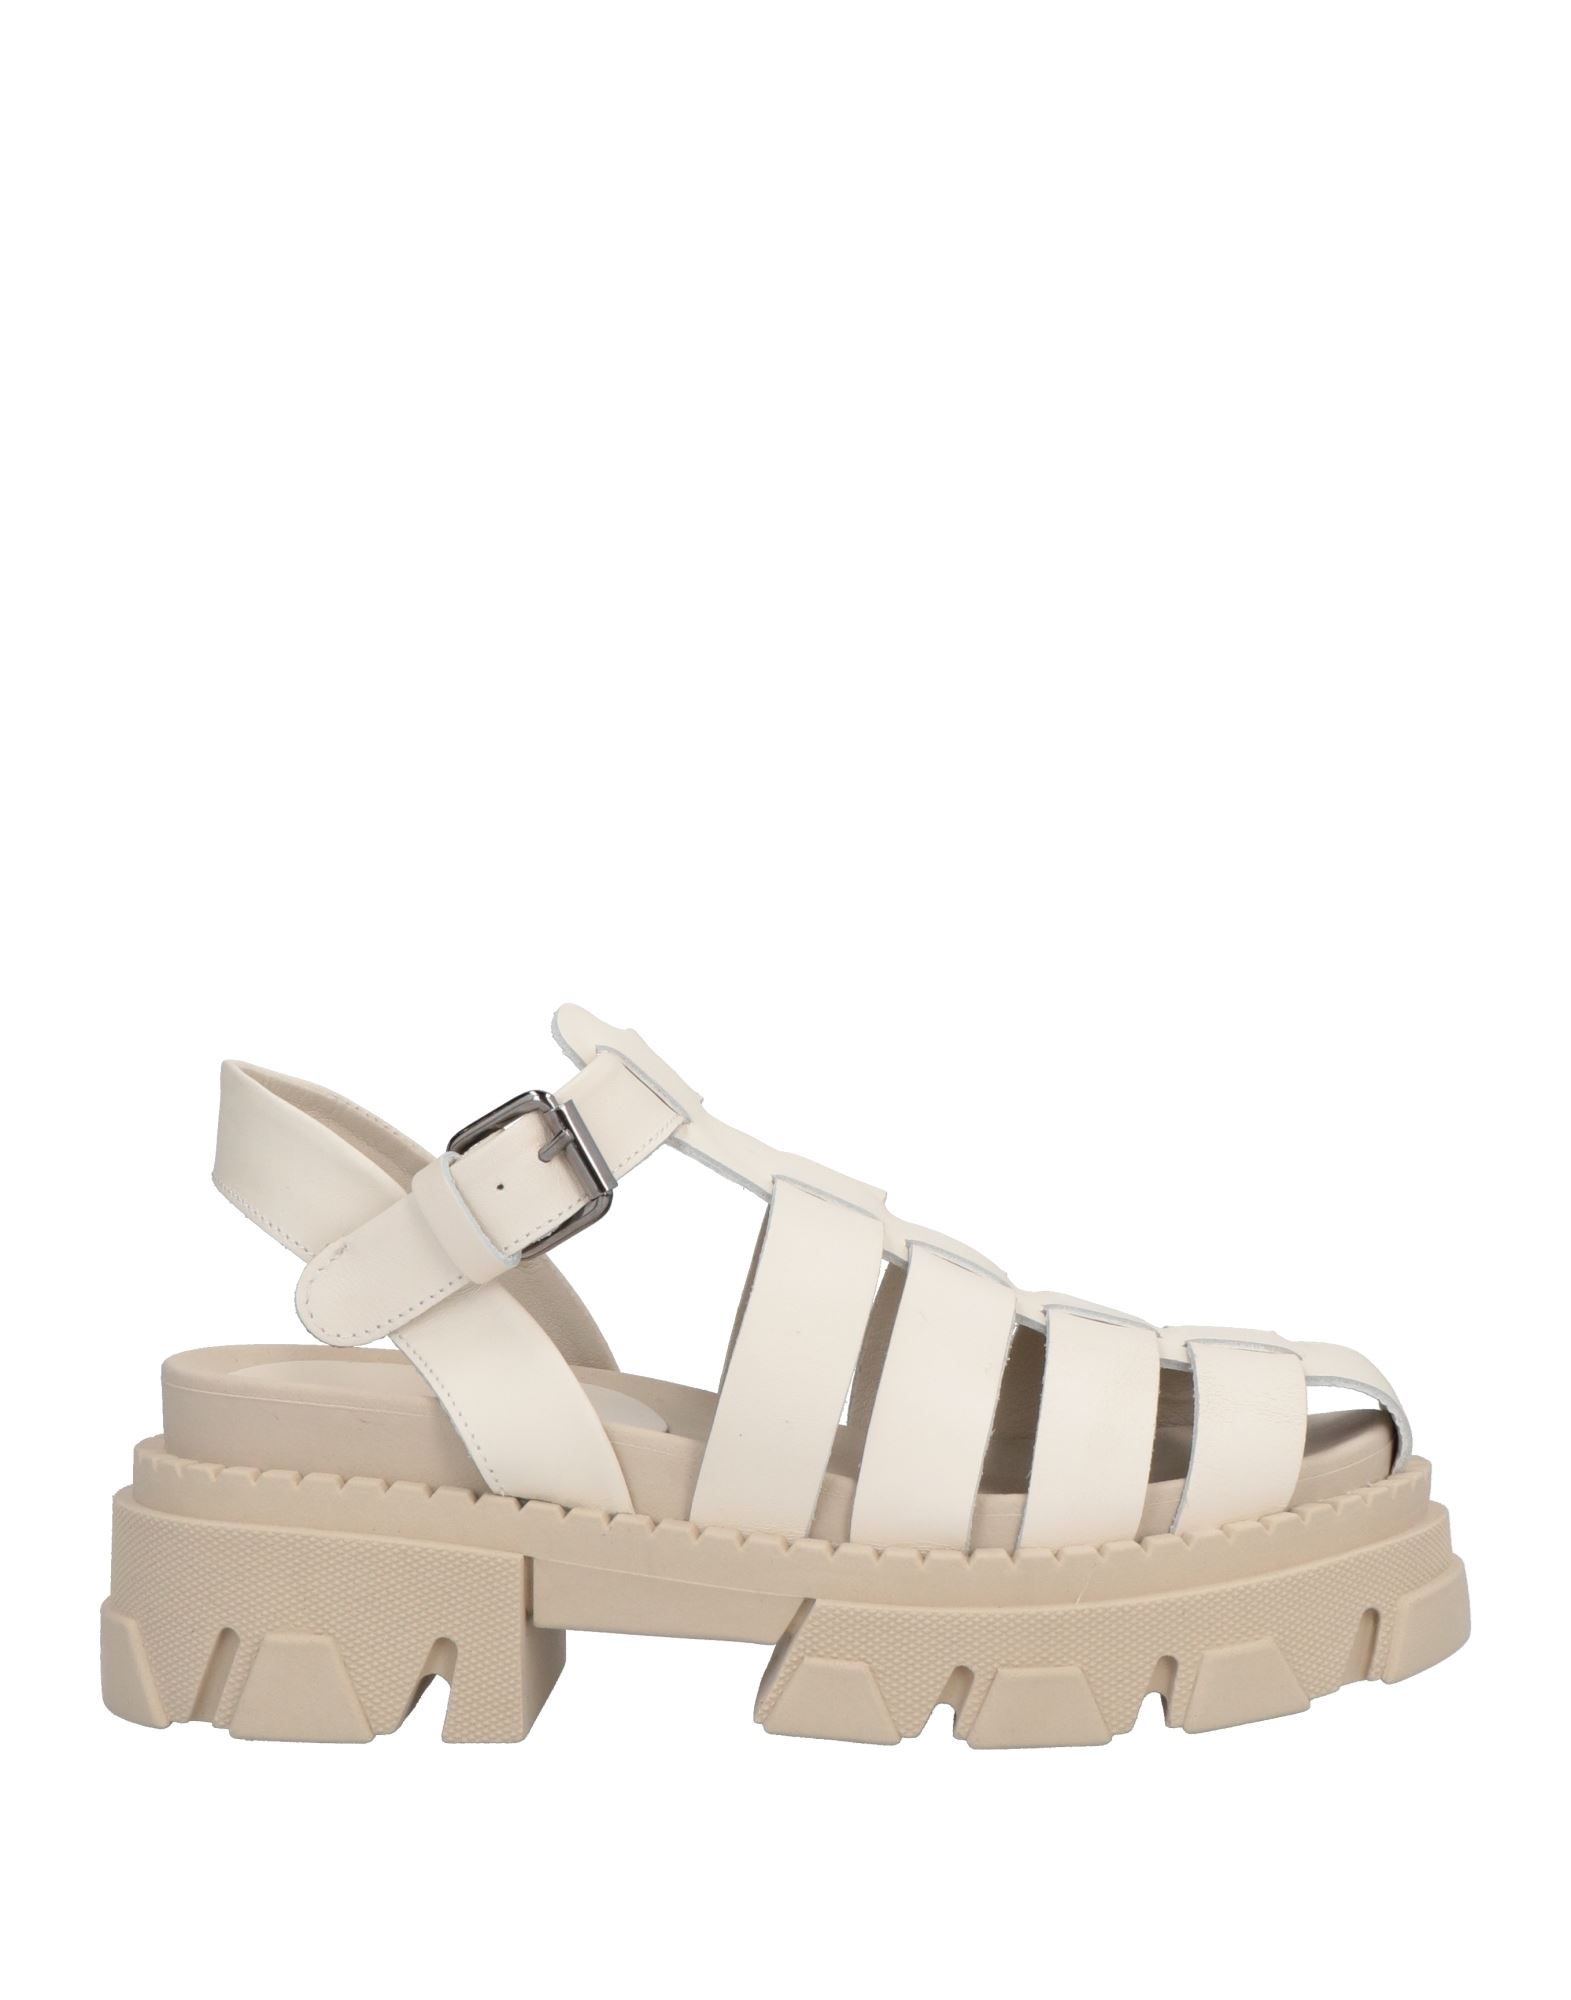 Noa A. Sandals In Ivory